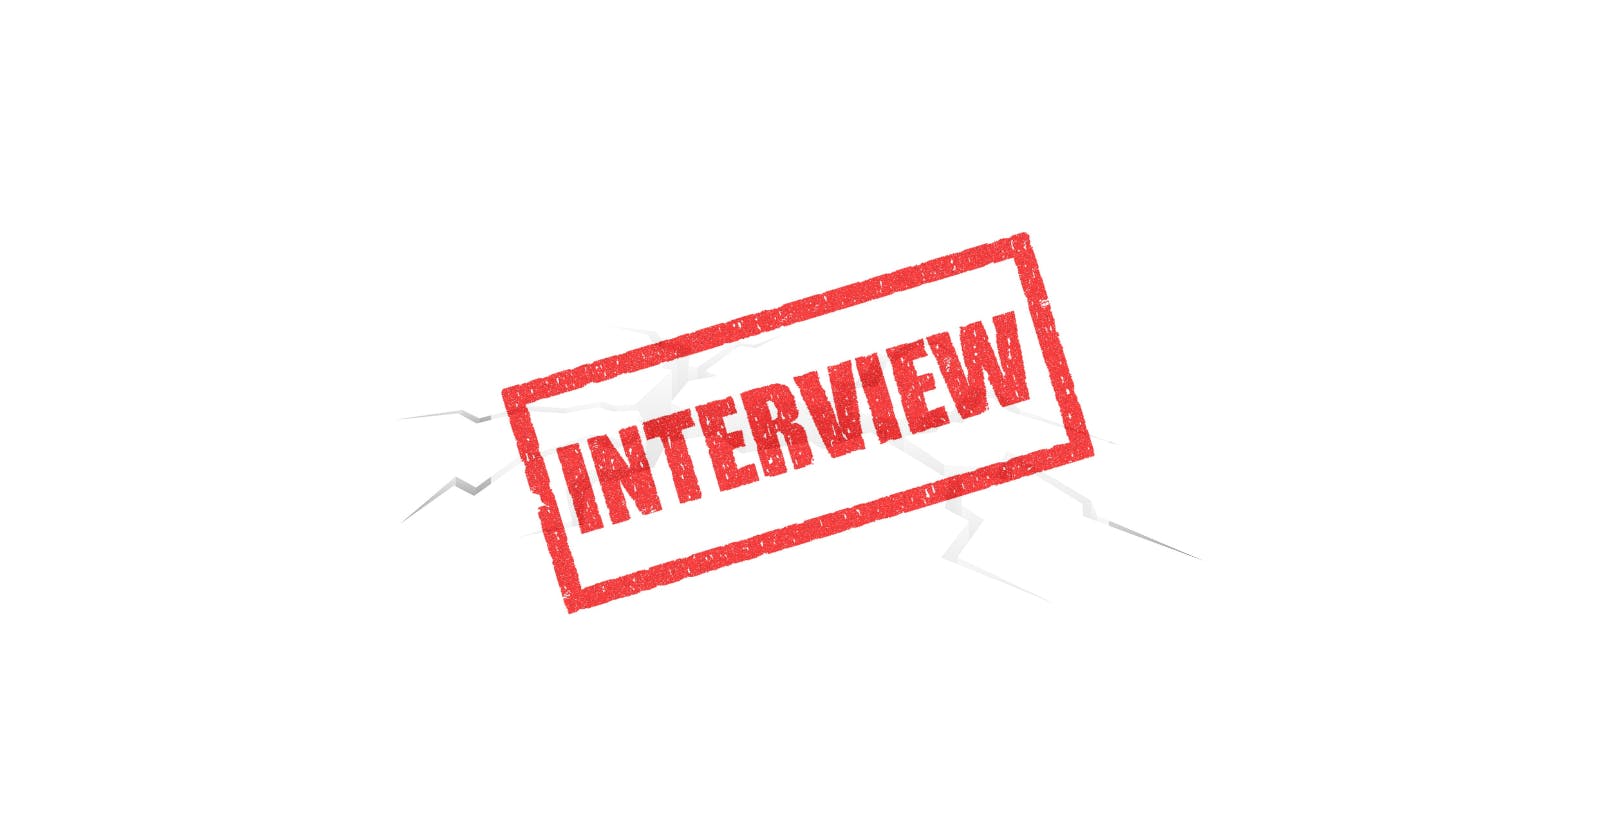 4+ years of cracking technical interviews